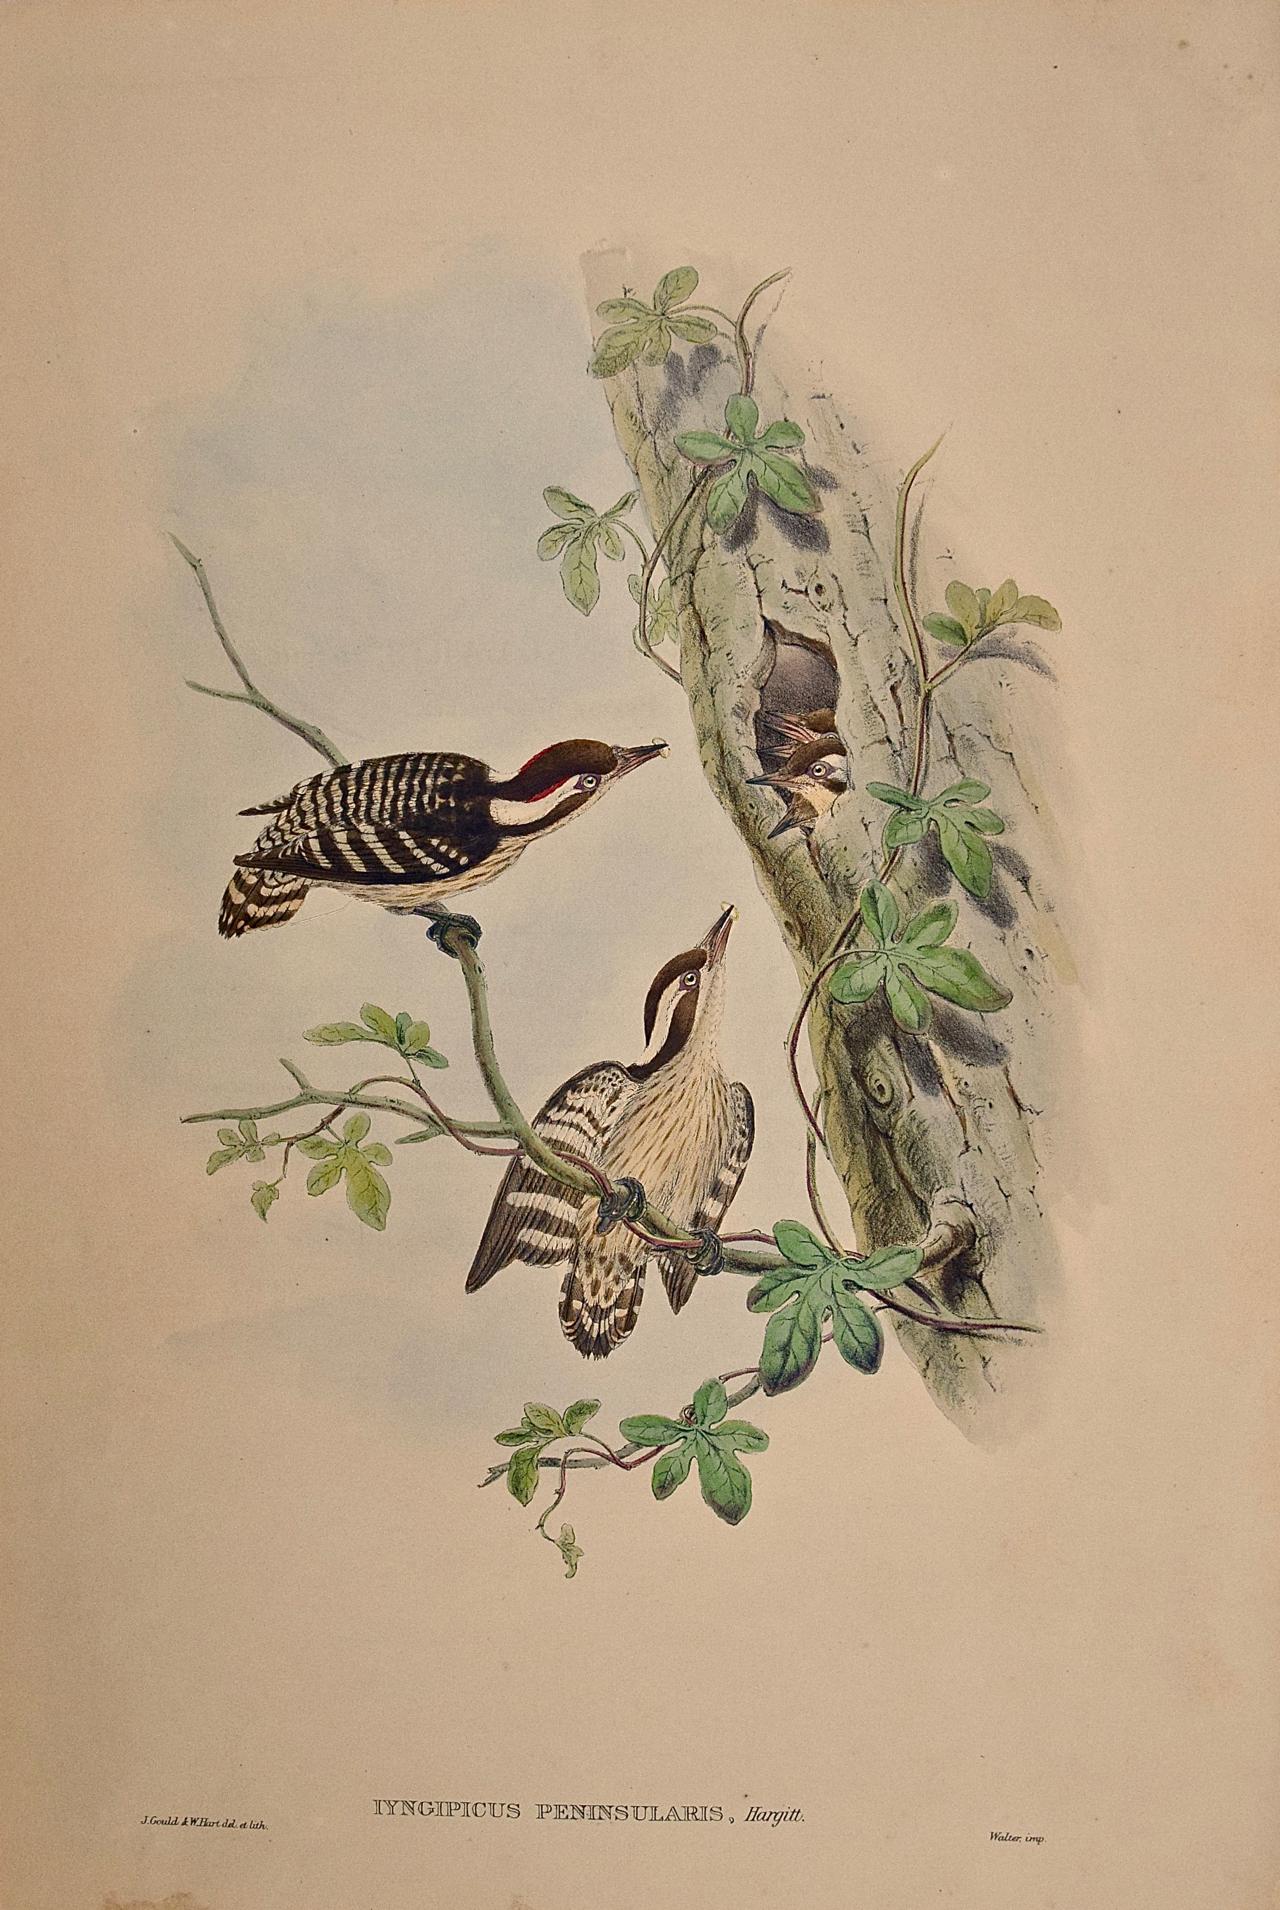 Woodpeckers, Travancore Peninsularis: A 19th C. Gould Hand-colored Lithograph